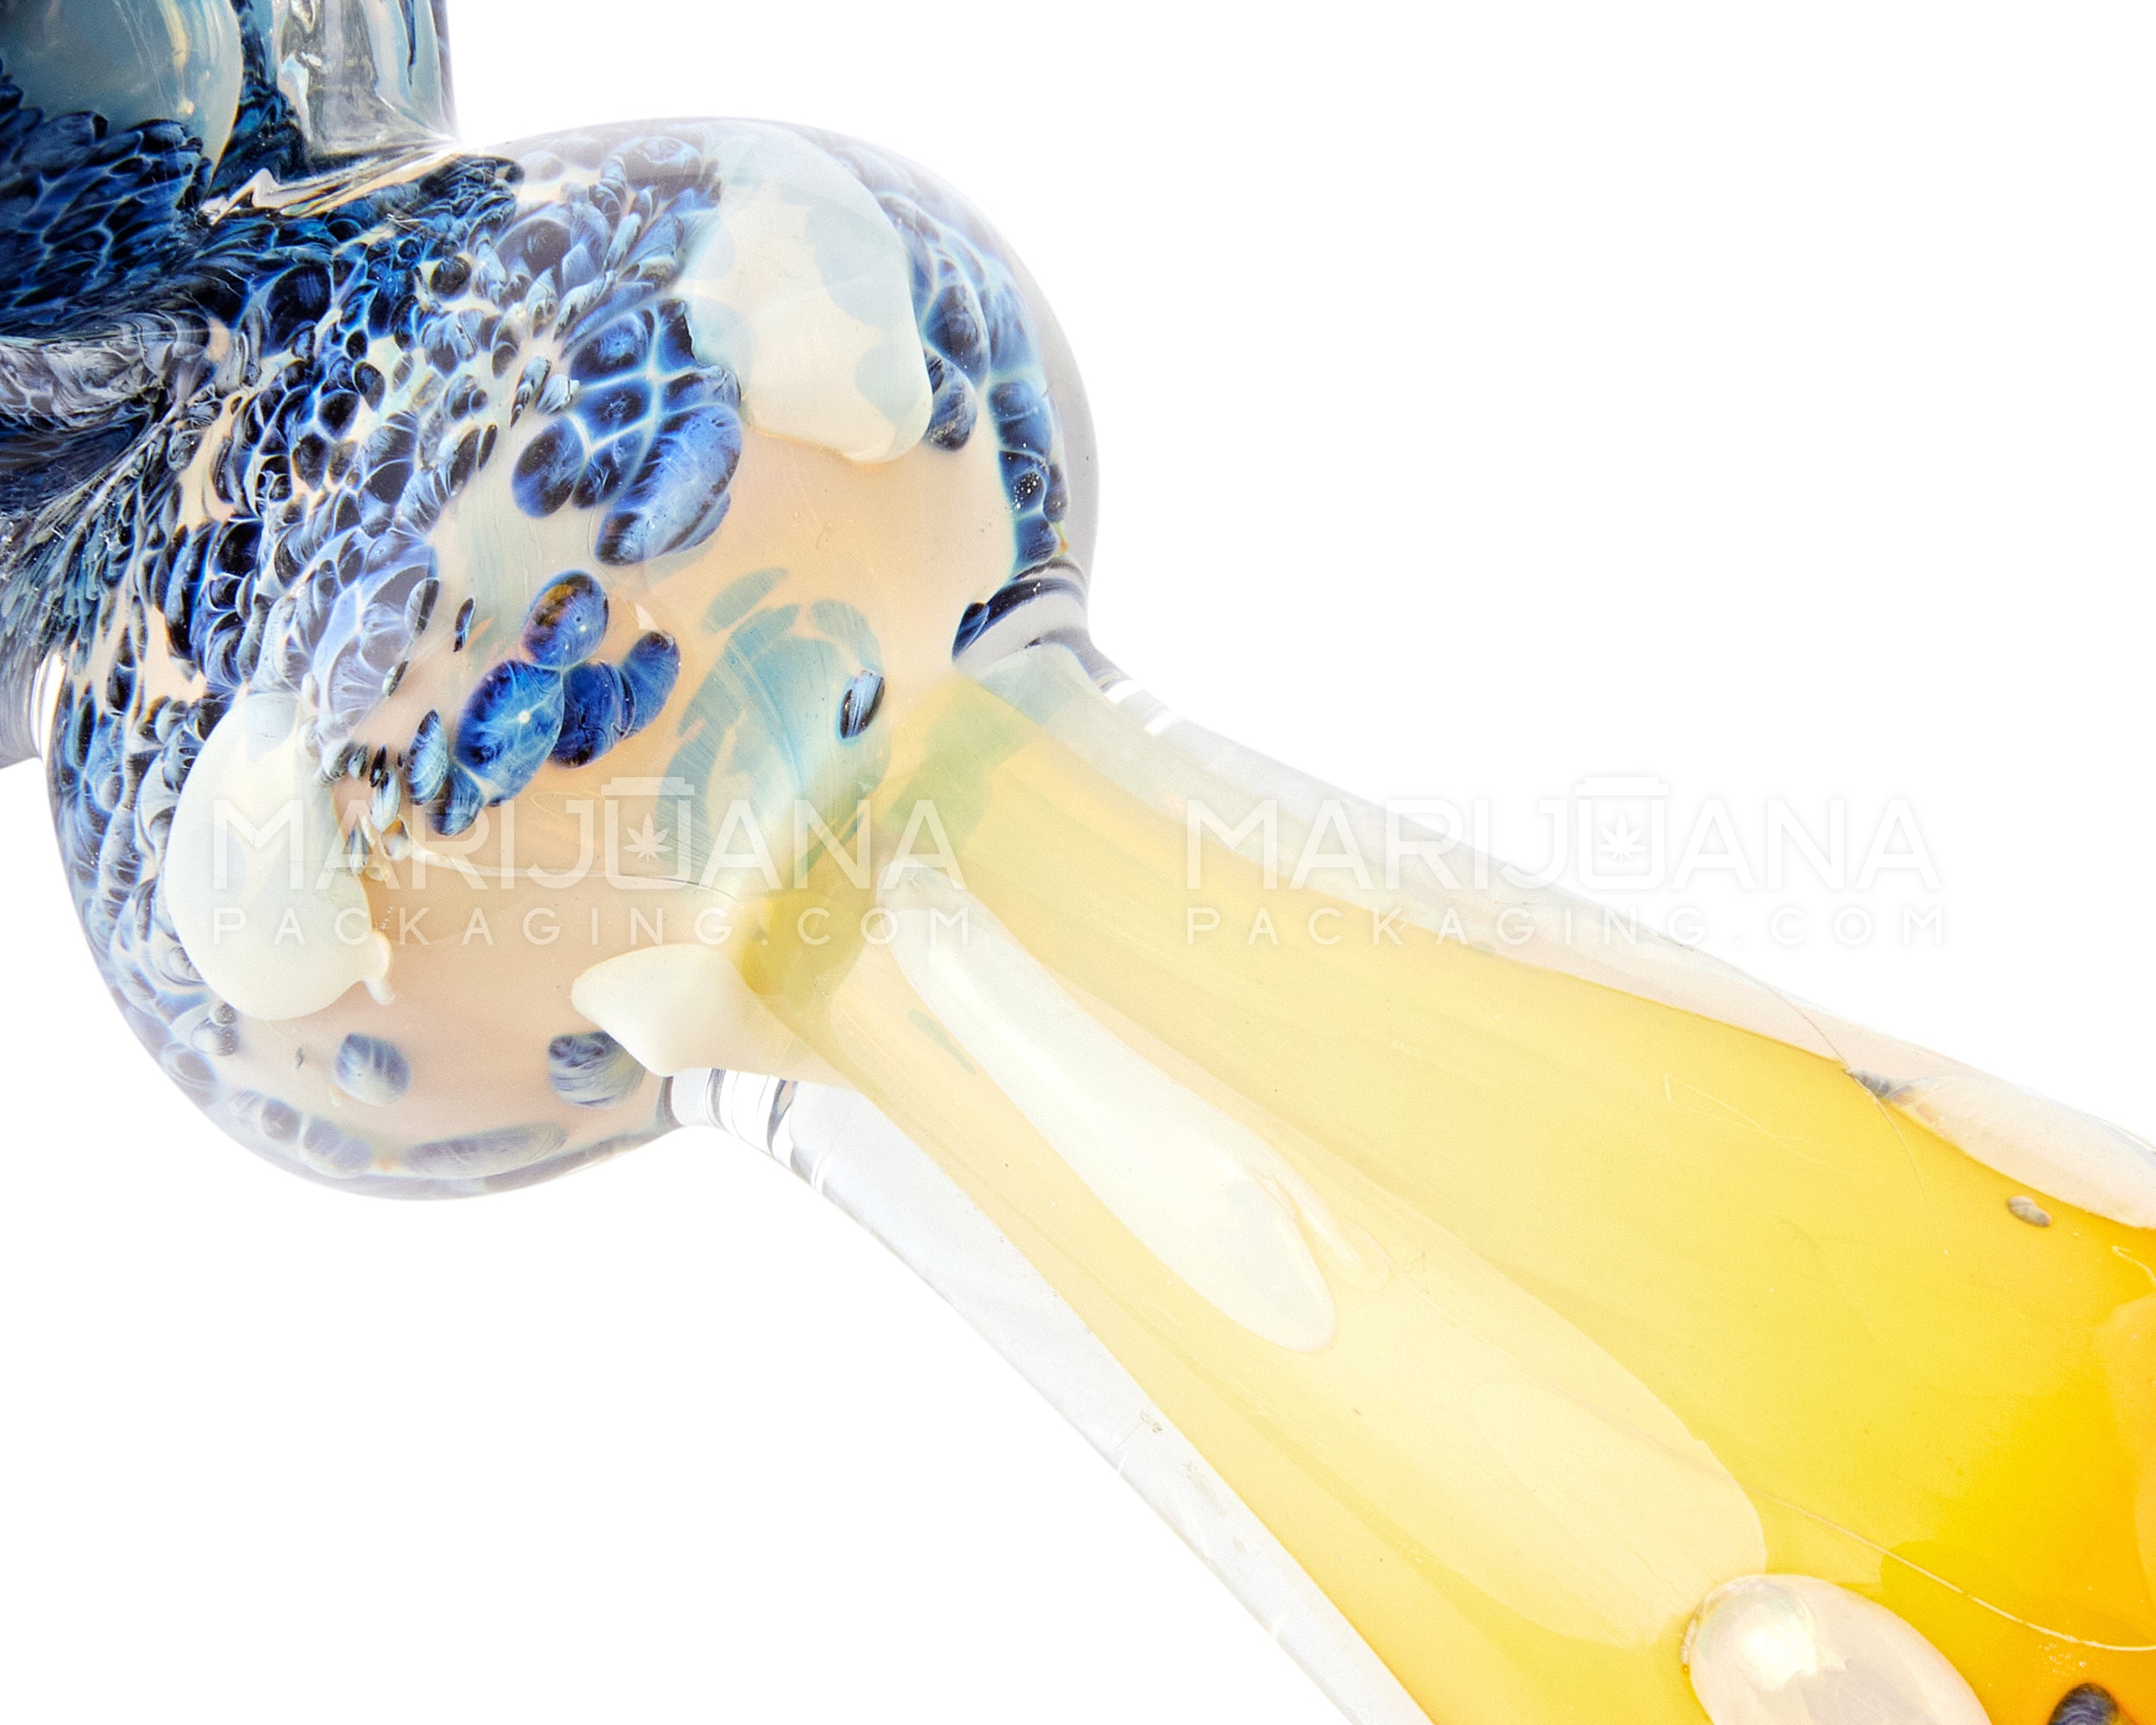 Frit & Fumed Spoon Hand Pipe w/ Single Bulge | 4.5in Long - Glass - Assorted